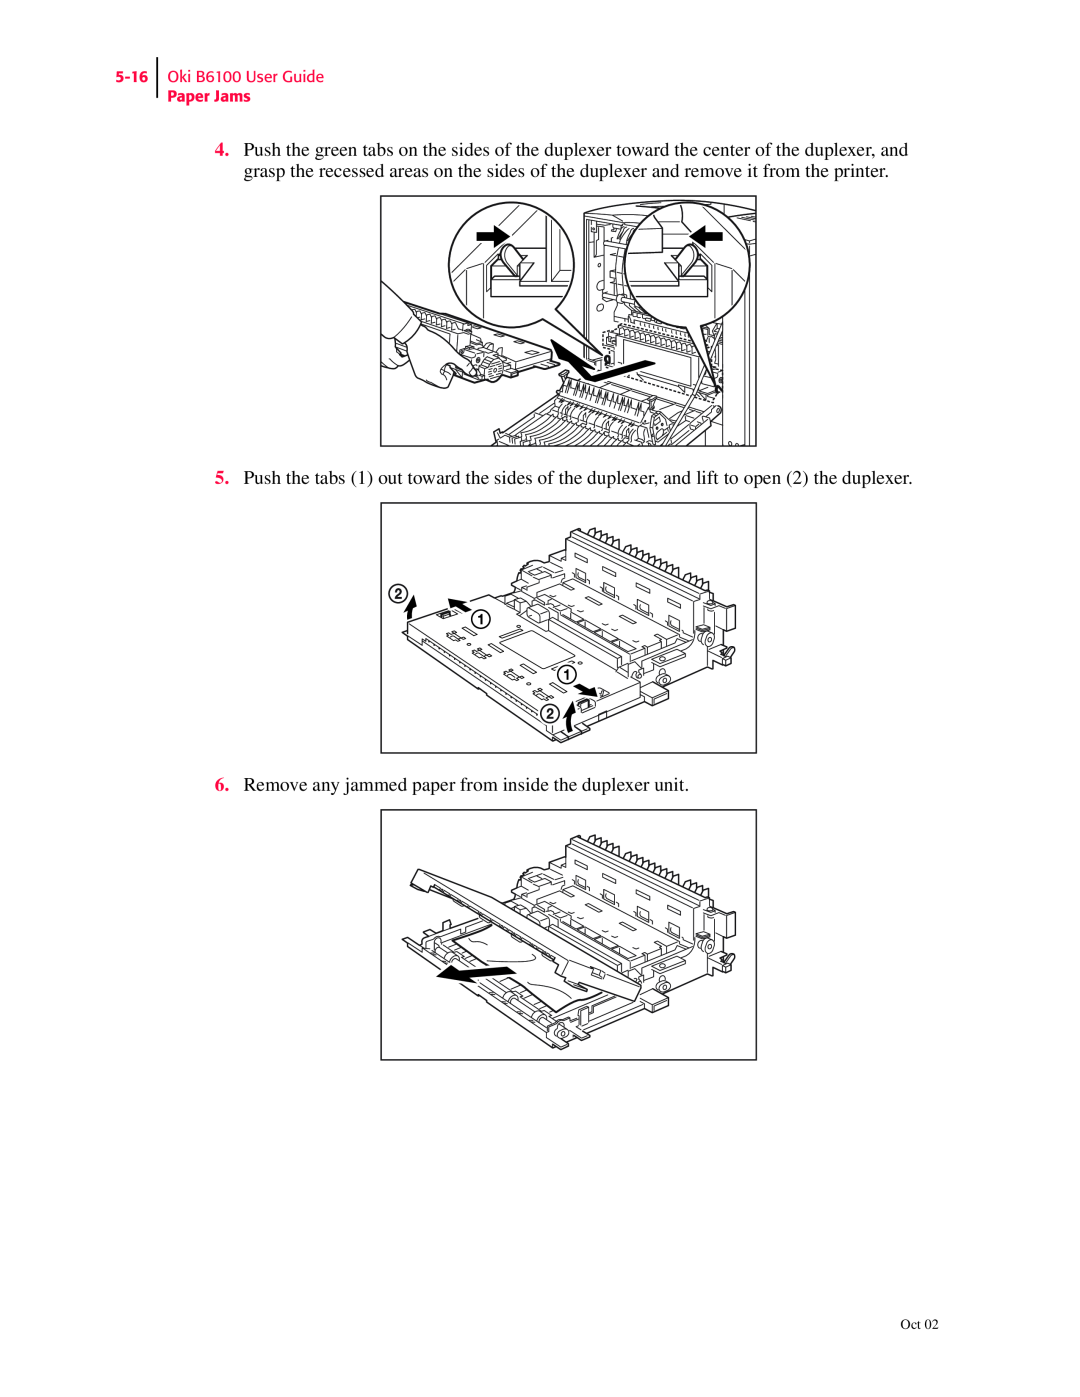 Oki manual Remove any jammed paper from inside the duplexer unit, Oki B6100 User Guide Paper Jams 